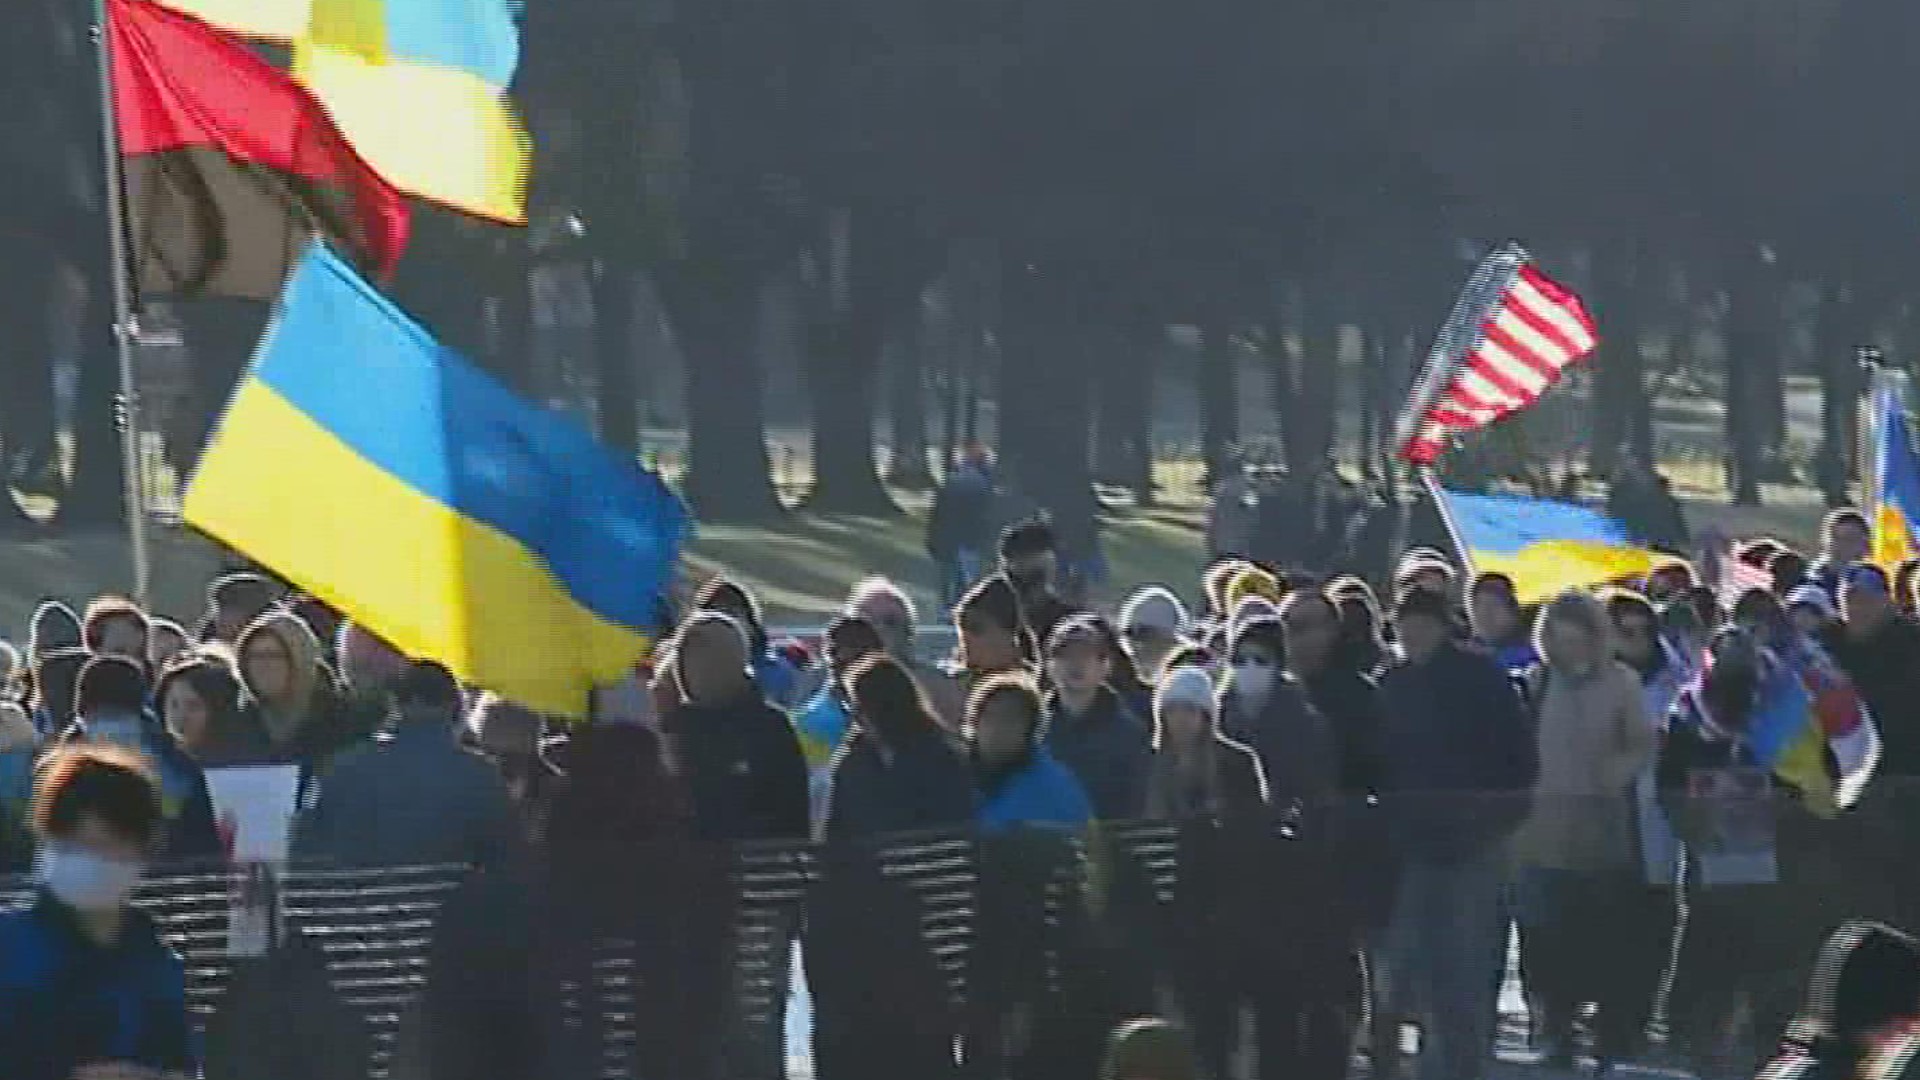 People here in Pennsylvania are standing with citizens of Ukraine. There was a big show of support over the weekend in Washington D.C.